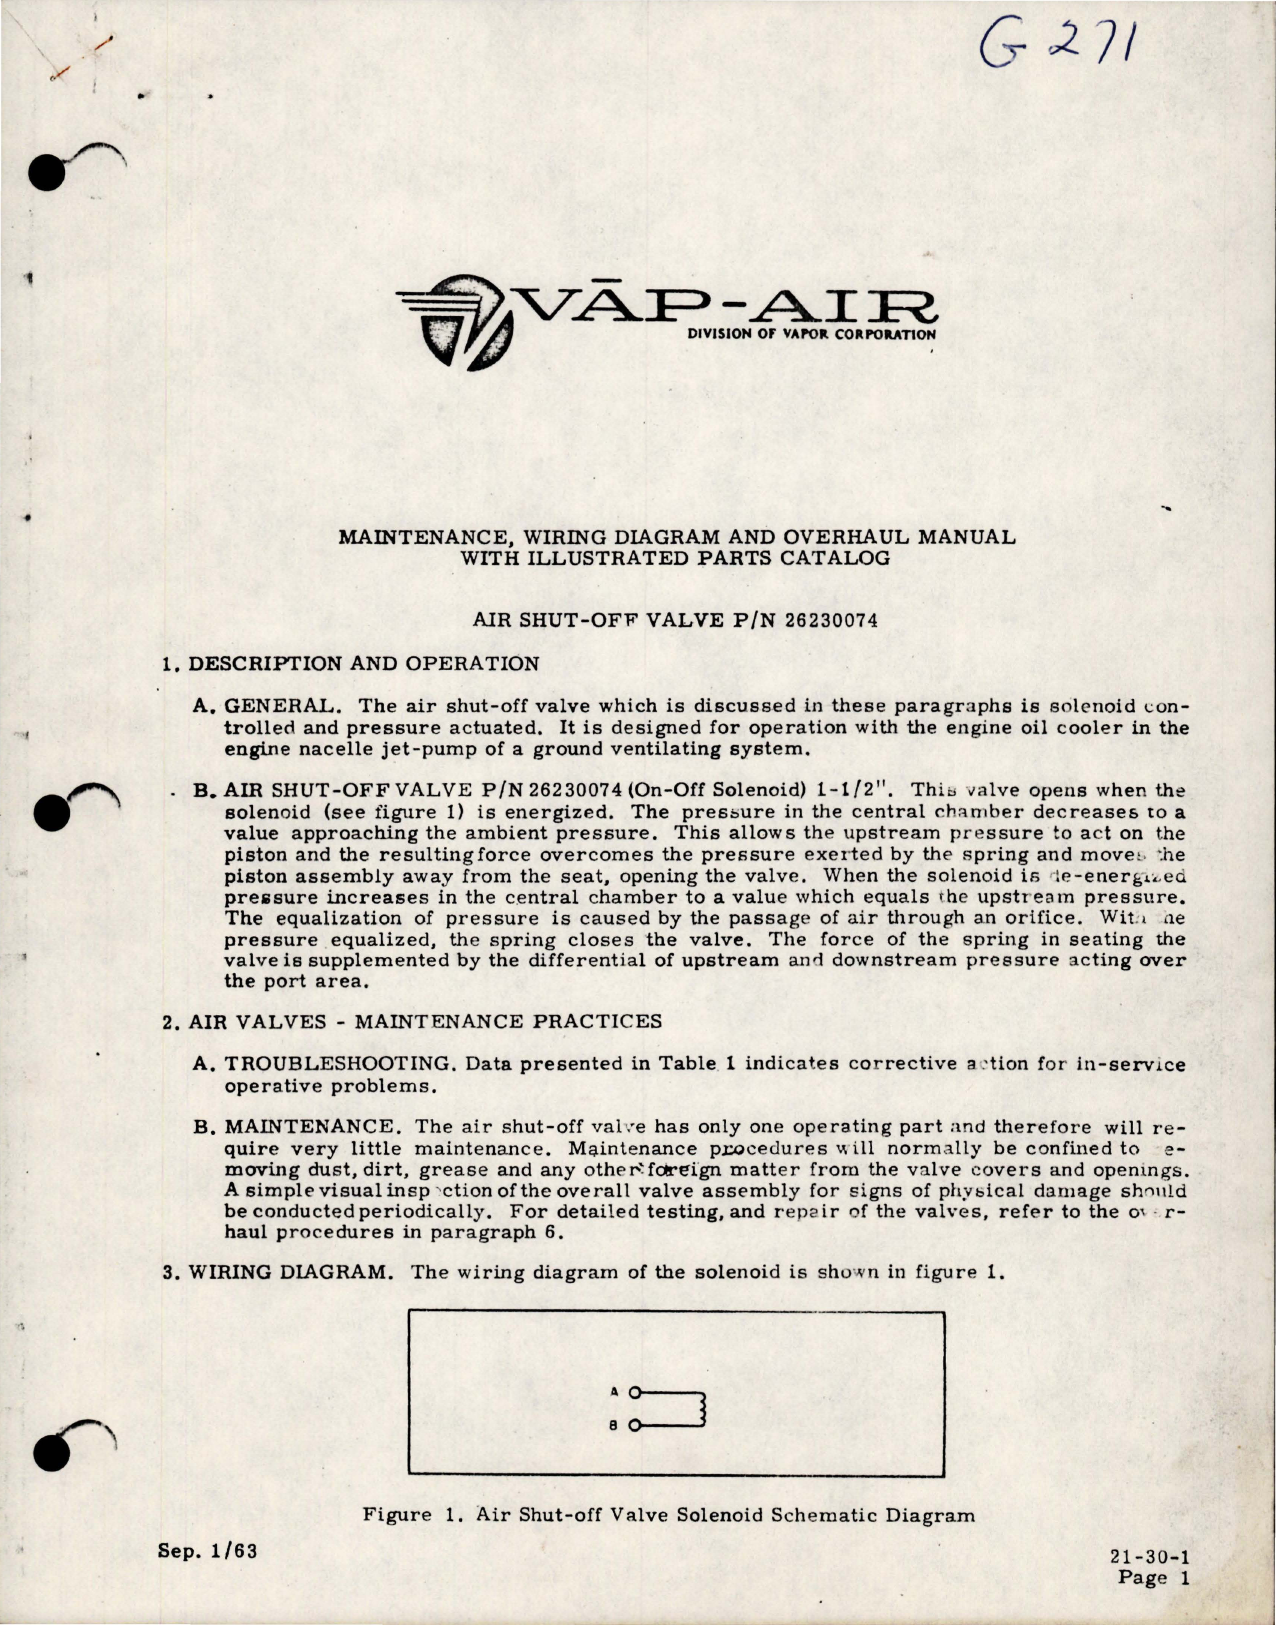 Sample page 1 from AirCorps Library document: Maintenance, Wiring Diagram, Overhaul Manual with Parts for Air Shut Off Valve - Part 26230074 